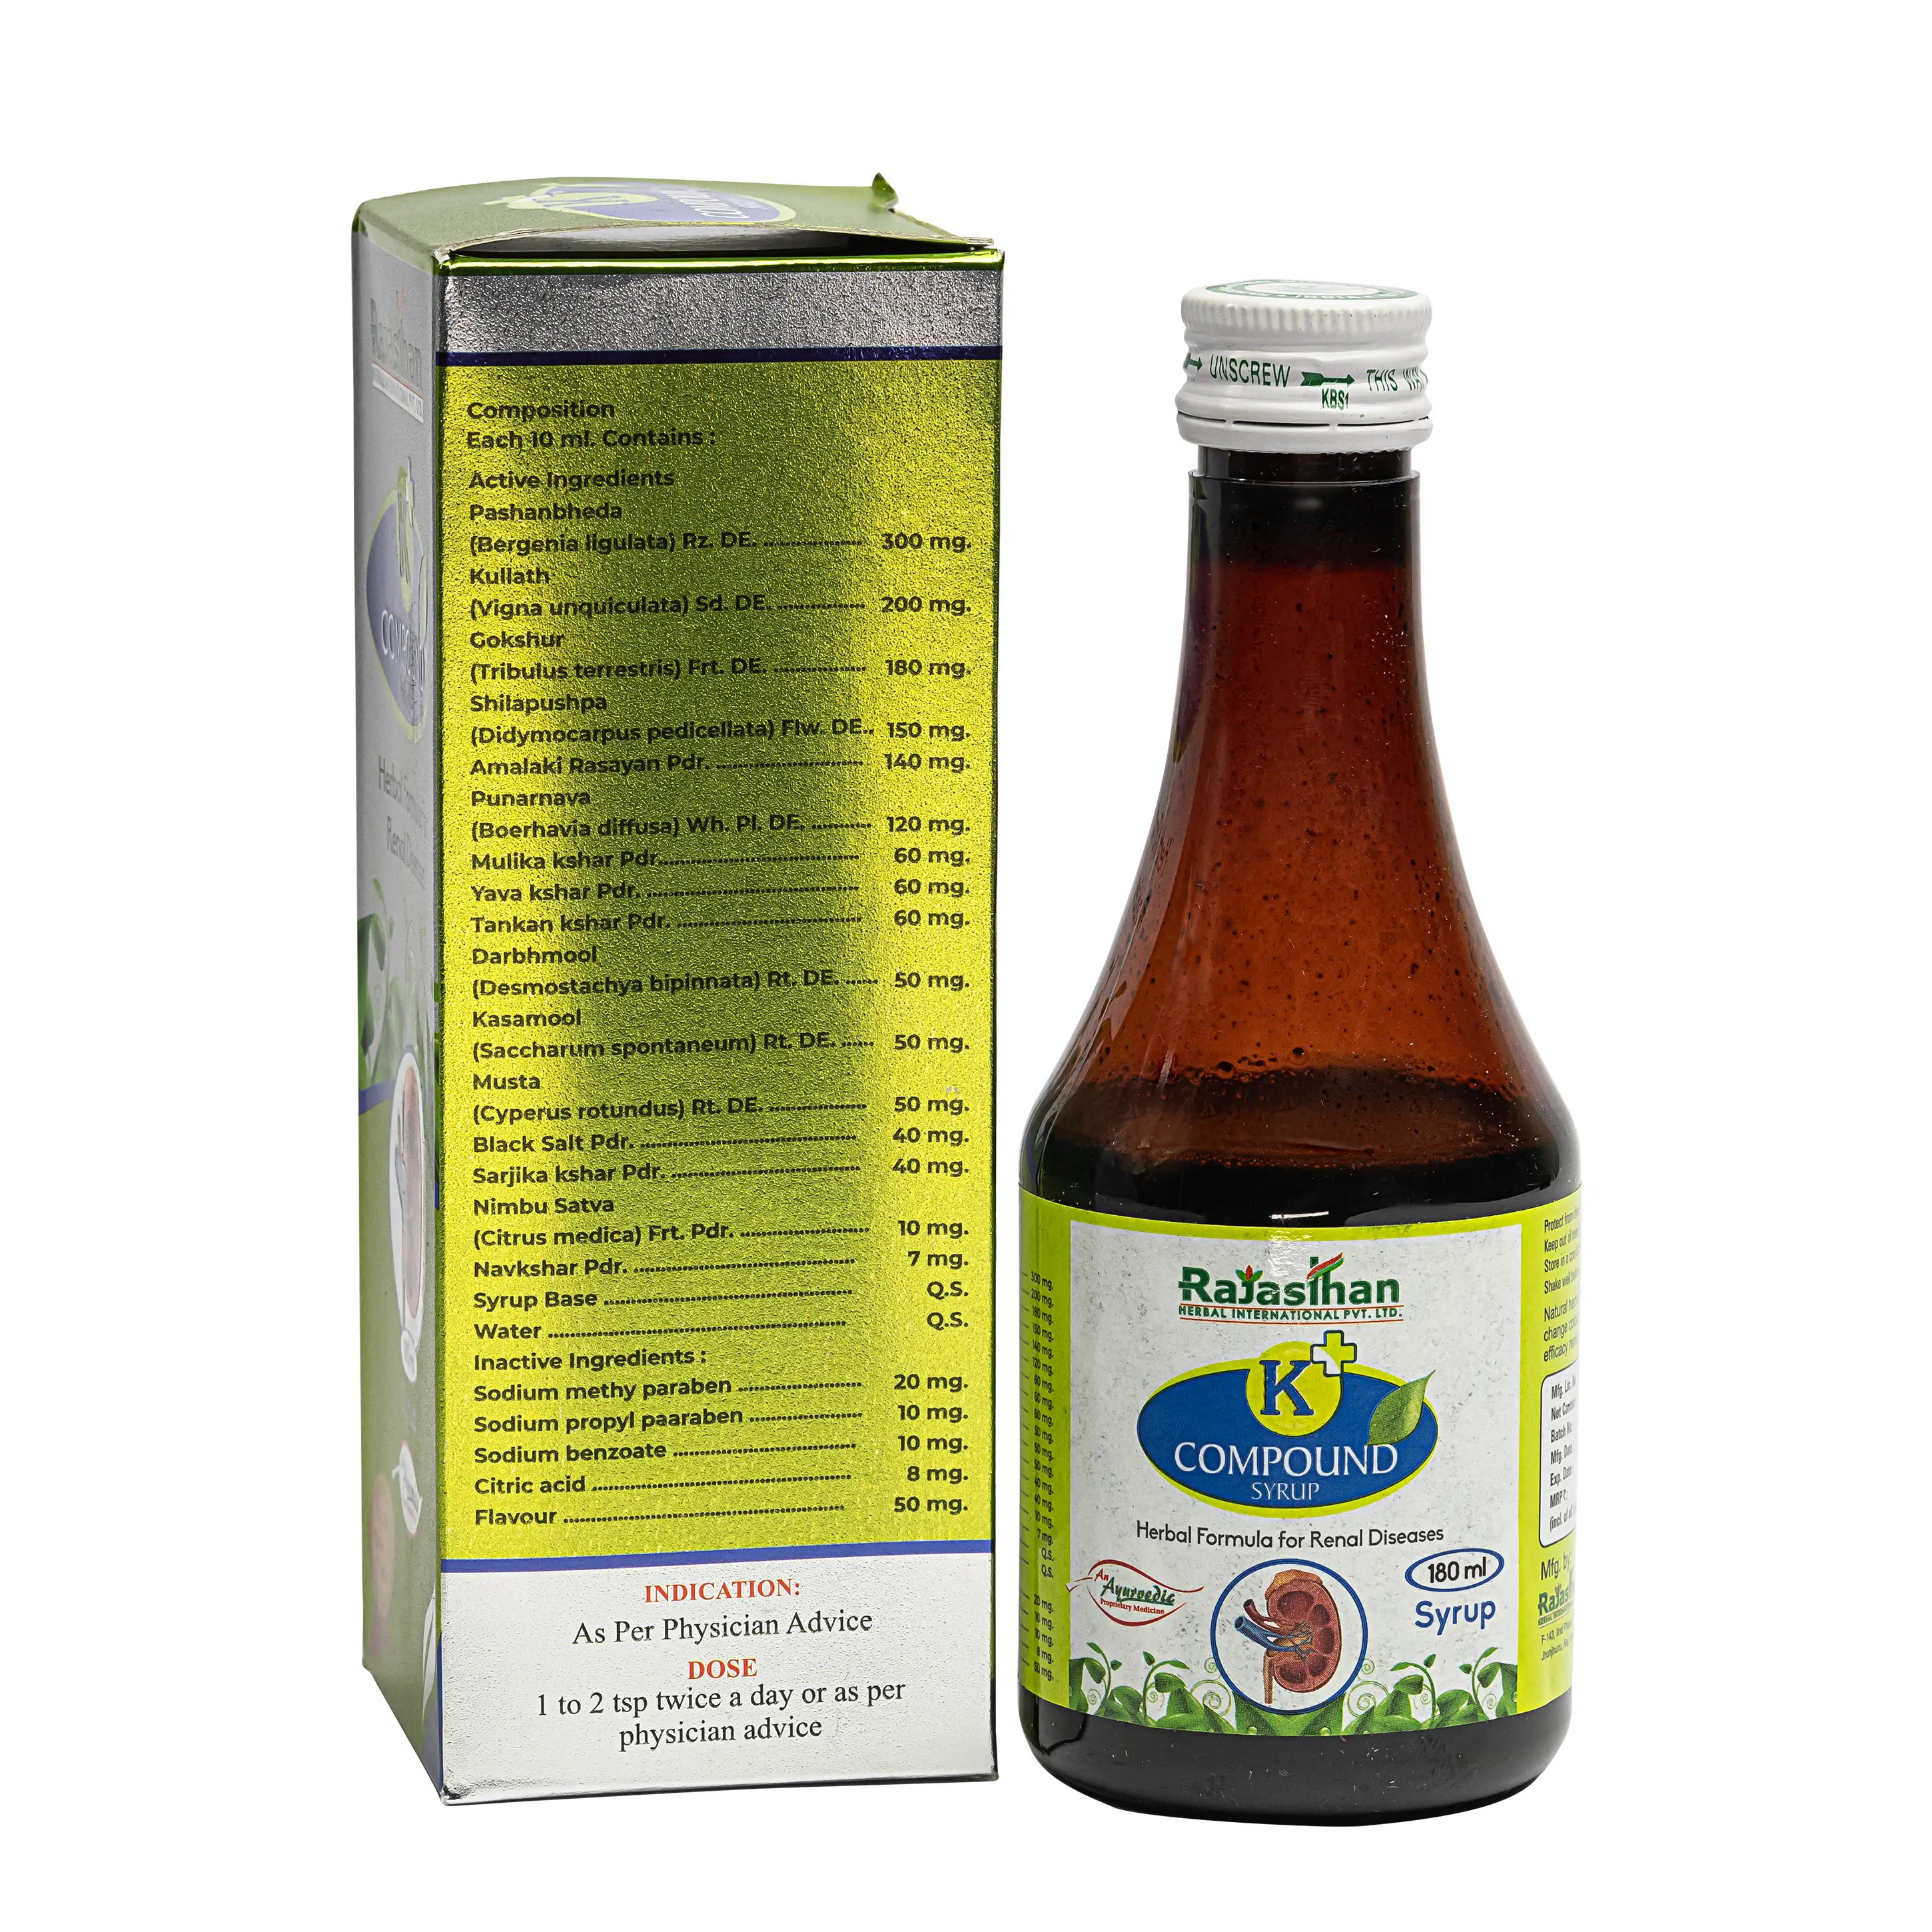 K Plus Compound Syrup 180ml Ingredients